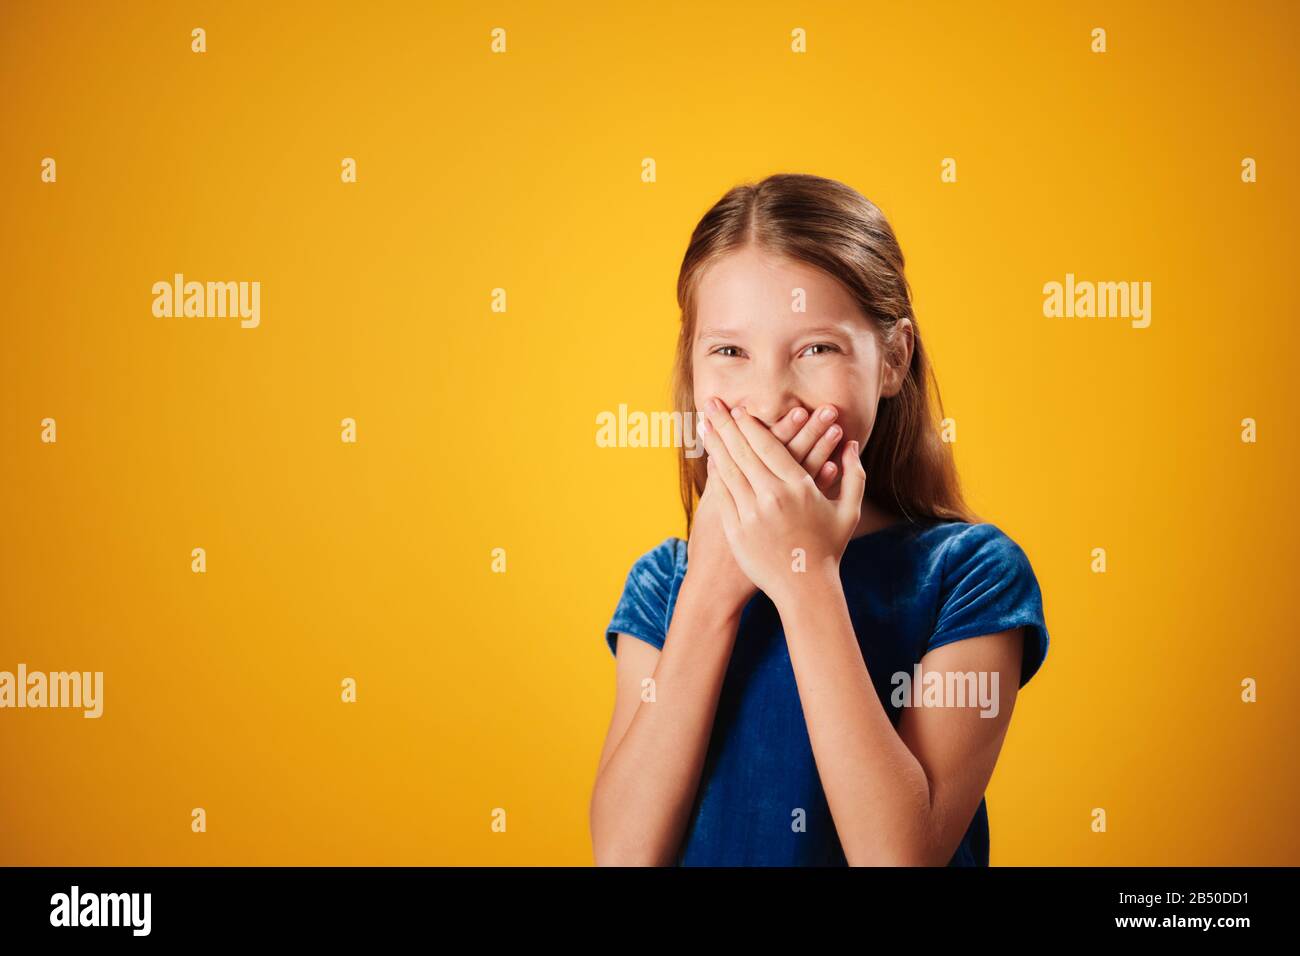 Surprised Little Redhead Girl Smiling And Covering Mouth Stock Photo